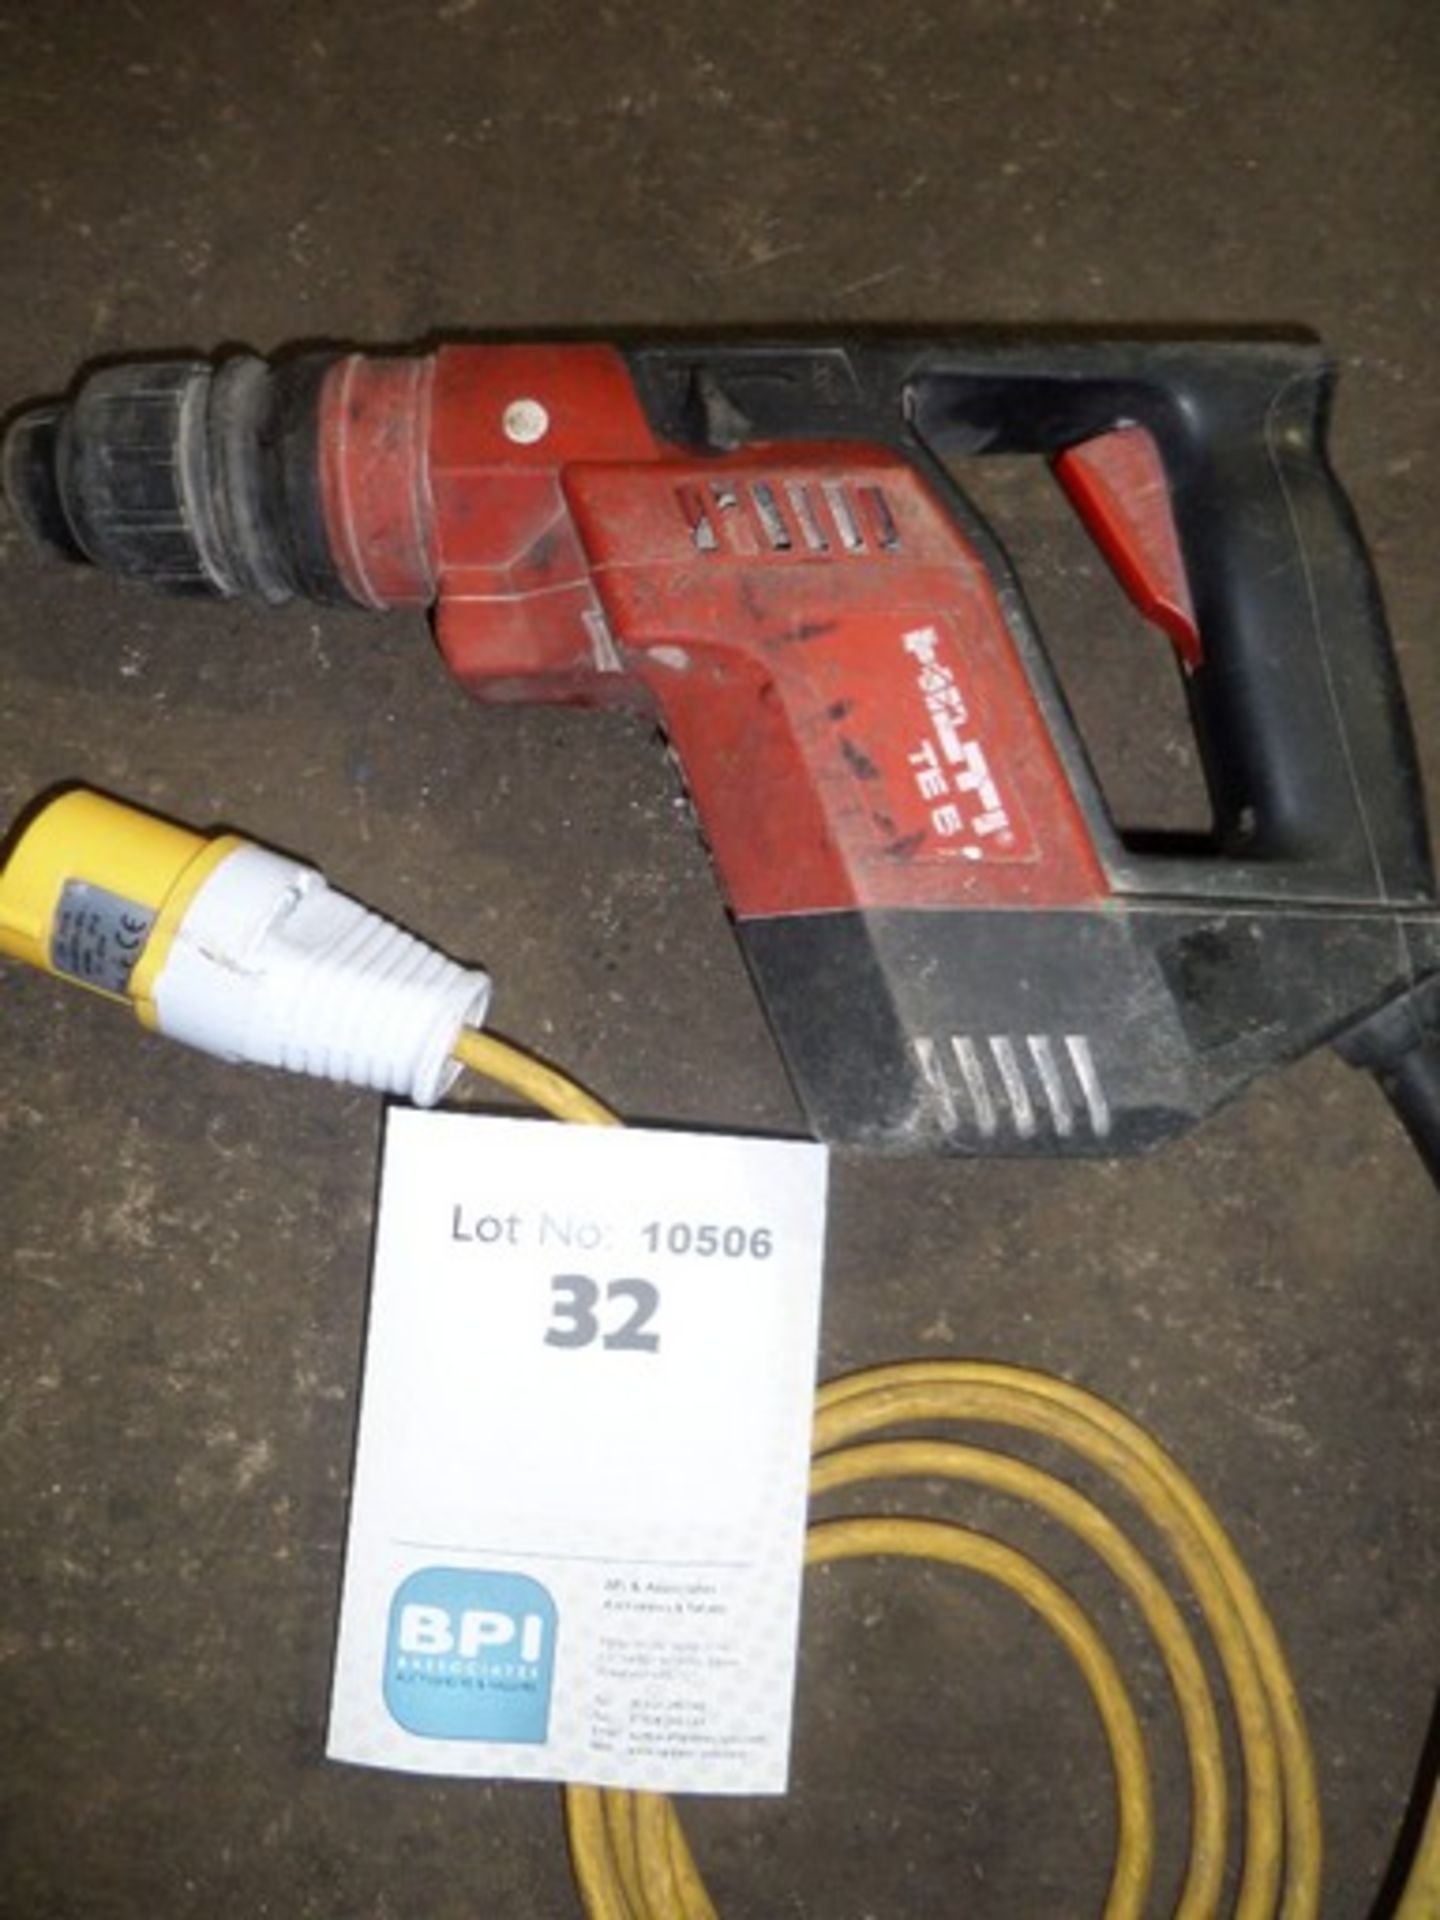 Hilti TE 5 {015209}  HAMMER DRILLER TE5/6 110v 16amp connection and appears to be working fine